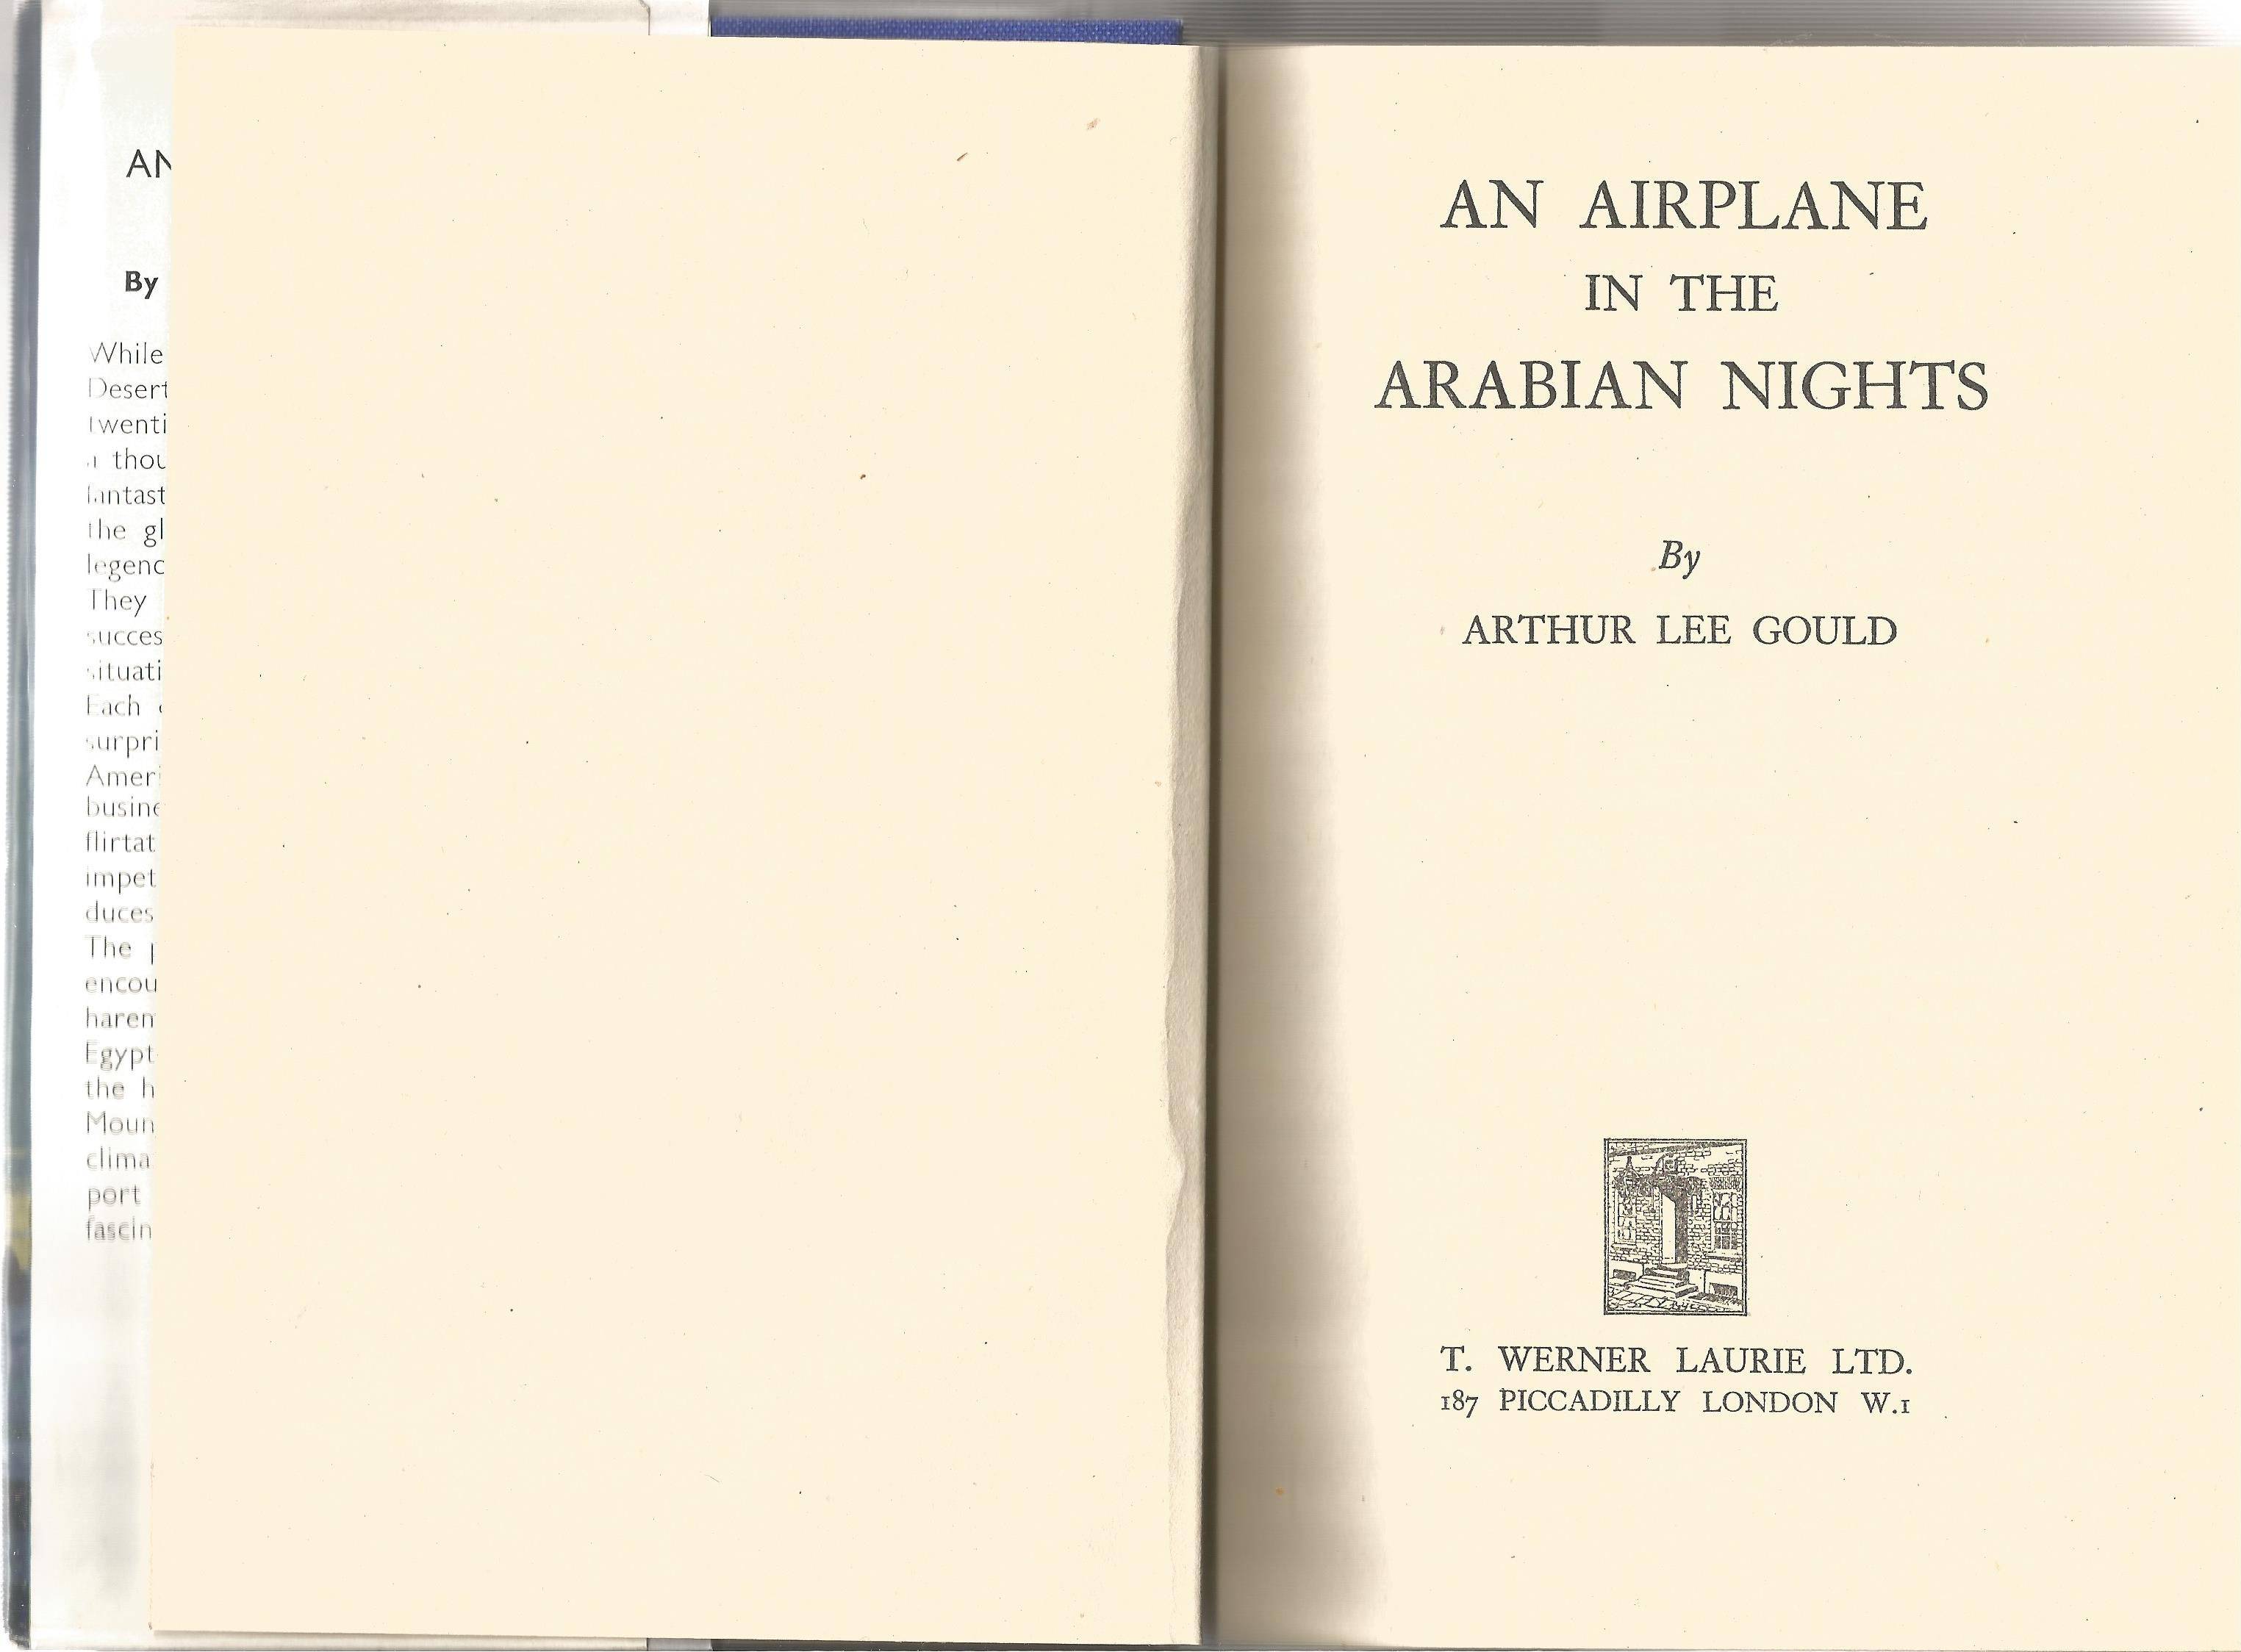 Arthur Lee Gould. An Airplane in the Arabian Nights. A Desmond Penrose personal slip attached to - Image 2 of 3